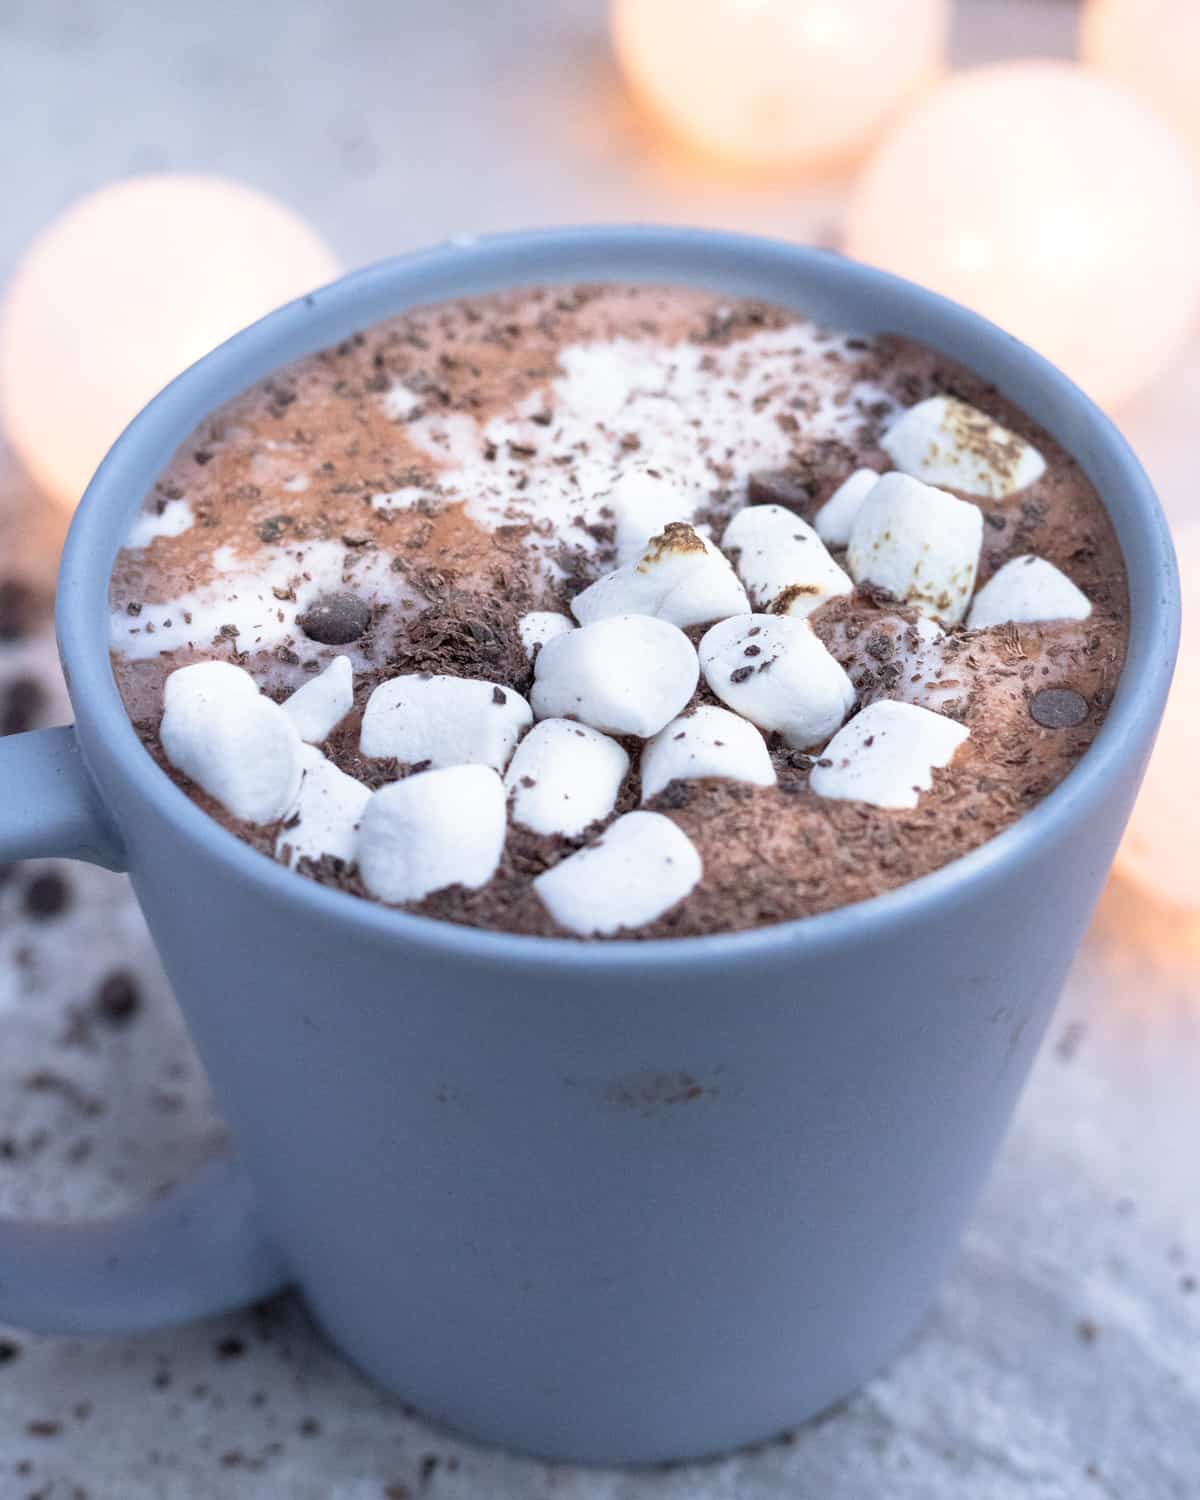 A mug of protein hot chocolate richly topped with marshmallows and a dusting of cocoa powder, set against a backdrop of warm glowing lights.